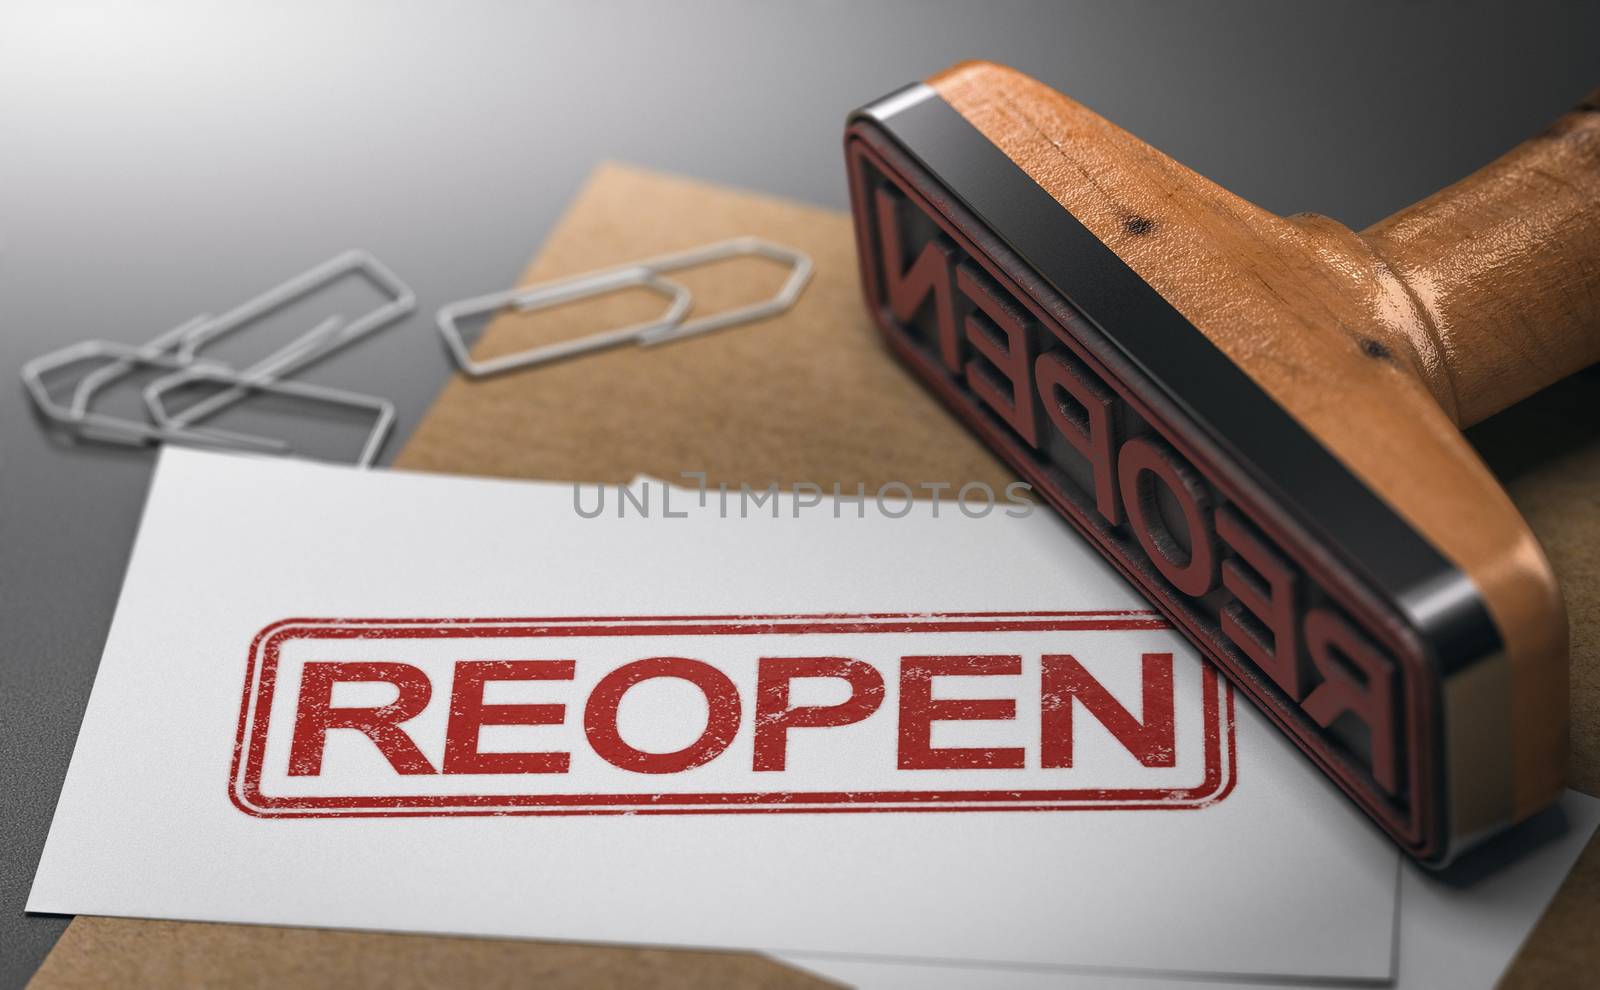 3D illustration of a business card with the word reopen printed on it and a rubber stamp. Concept of reopening economy.